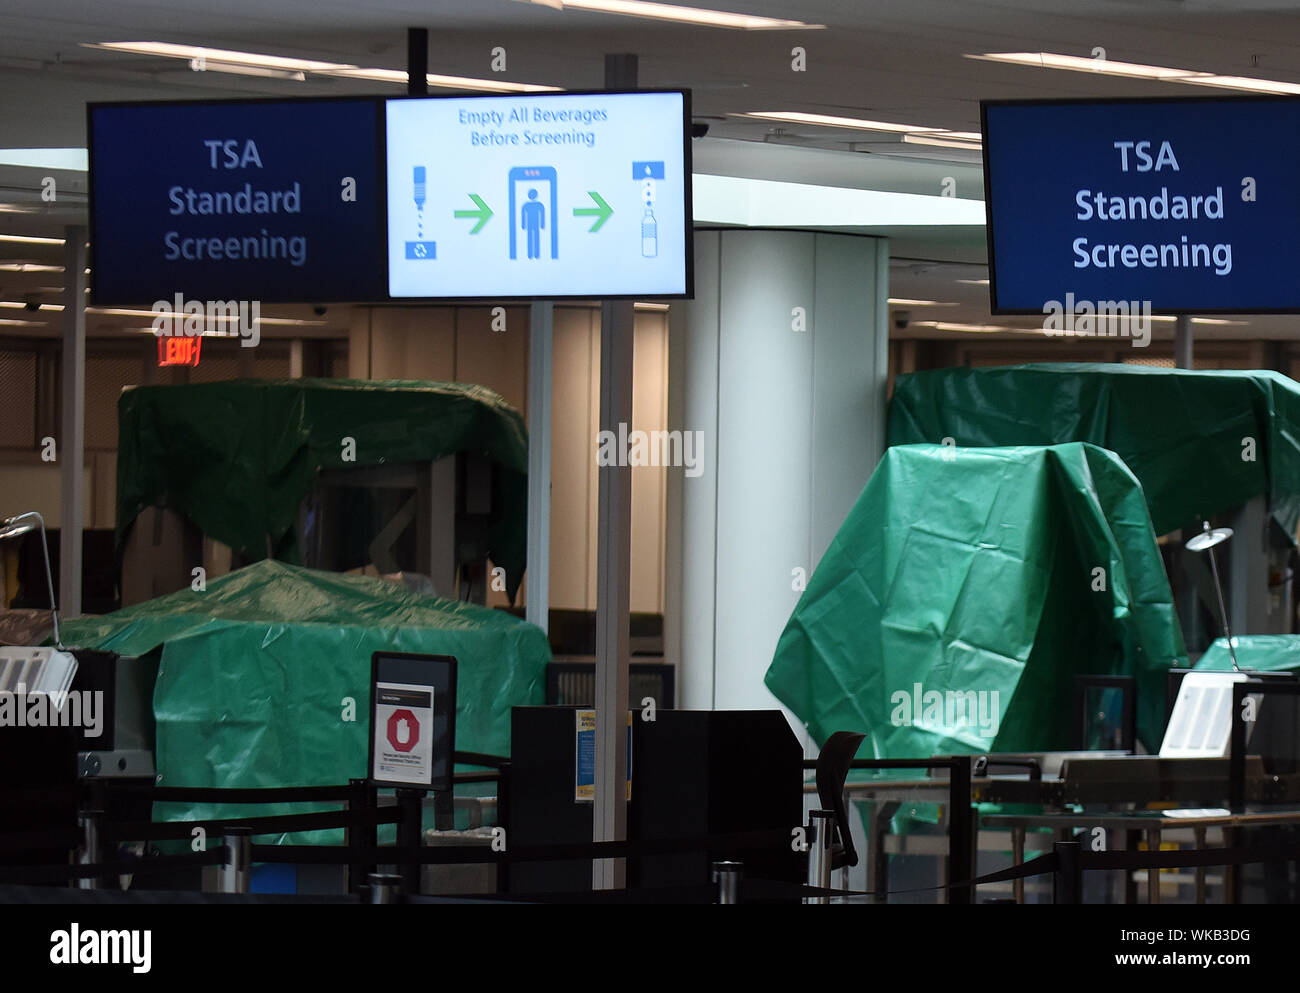 Orlando, United States. 03rd Sep, 2019. Plastic tarps are seen being used for covering the security screening equipment used by TSA at Orlando International Airport, The airport was closed on September 3, 2019 as Hurricane Dorian turns to the north off the eastern coast of Florida after a weakened Category 2 storm devastates parts of the Bahamas. Credit: SOPA Images Limited/Alamy Live News Stock Photo